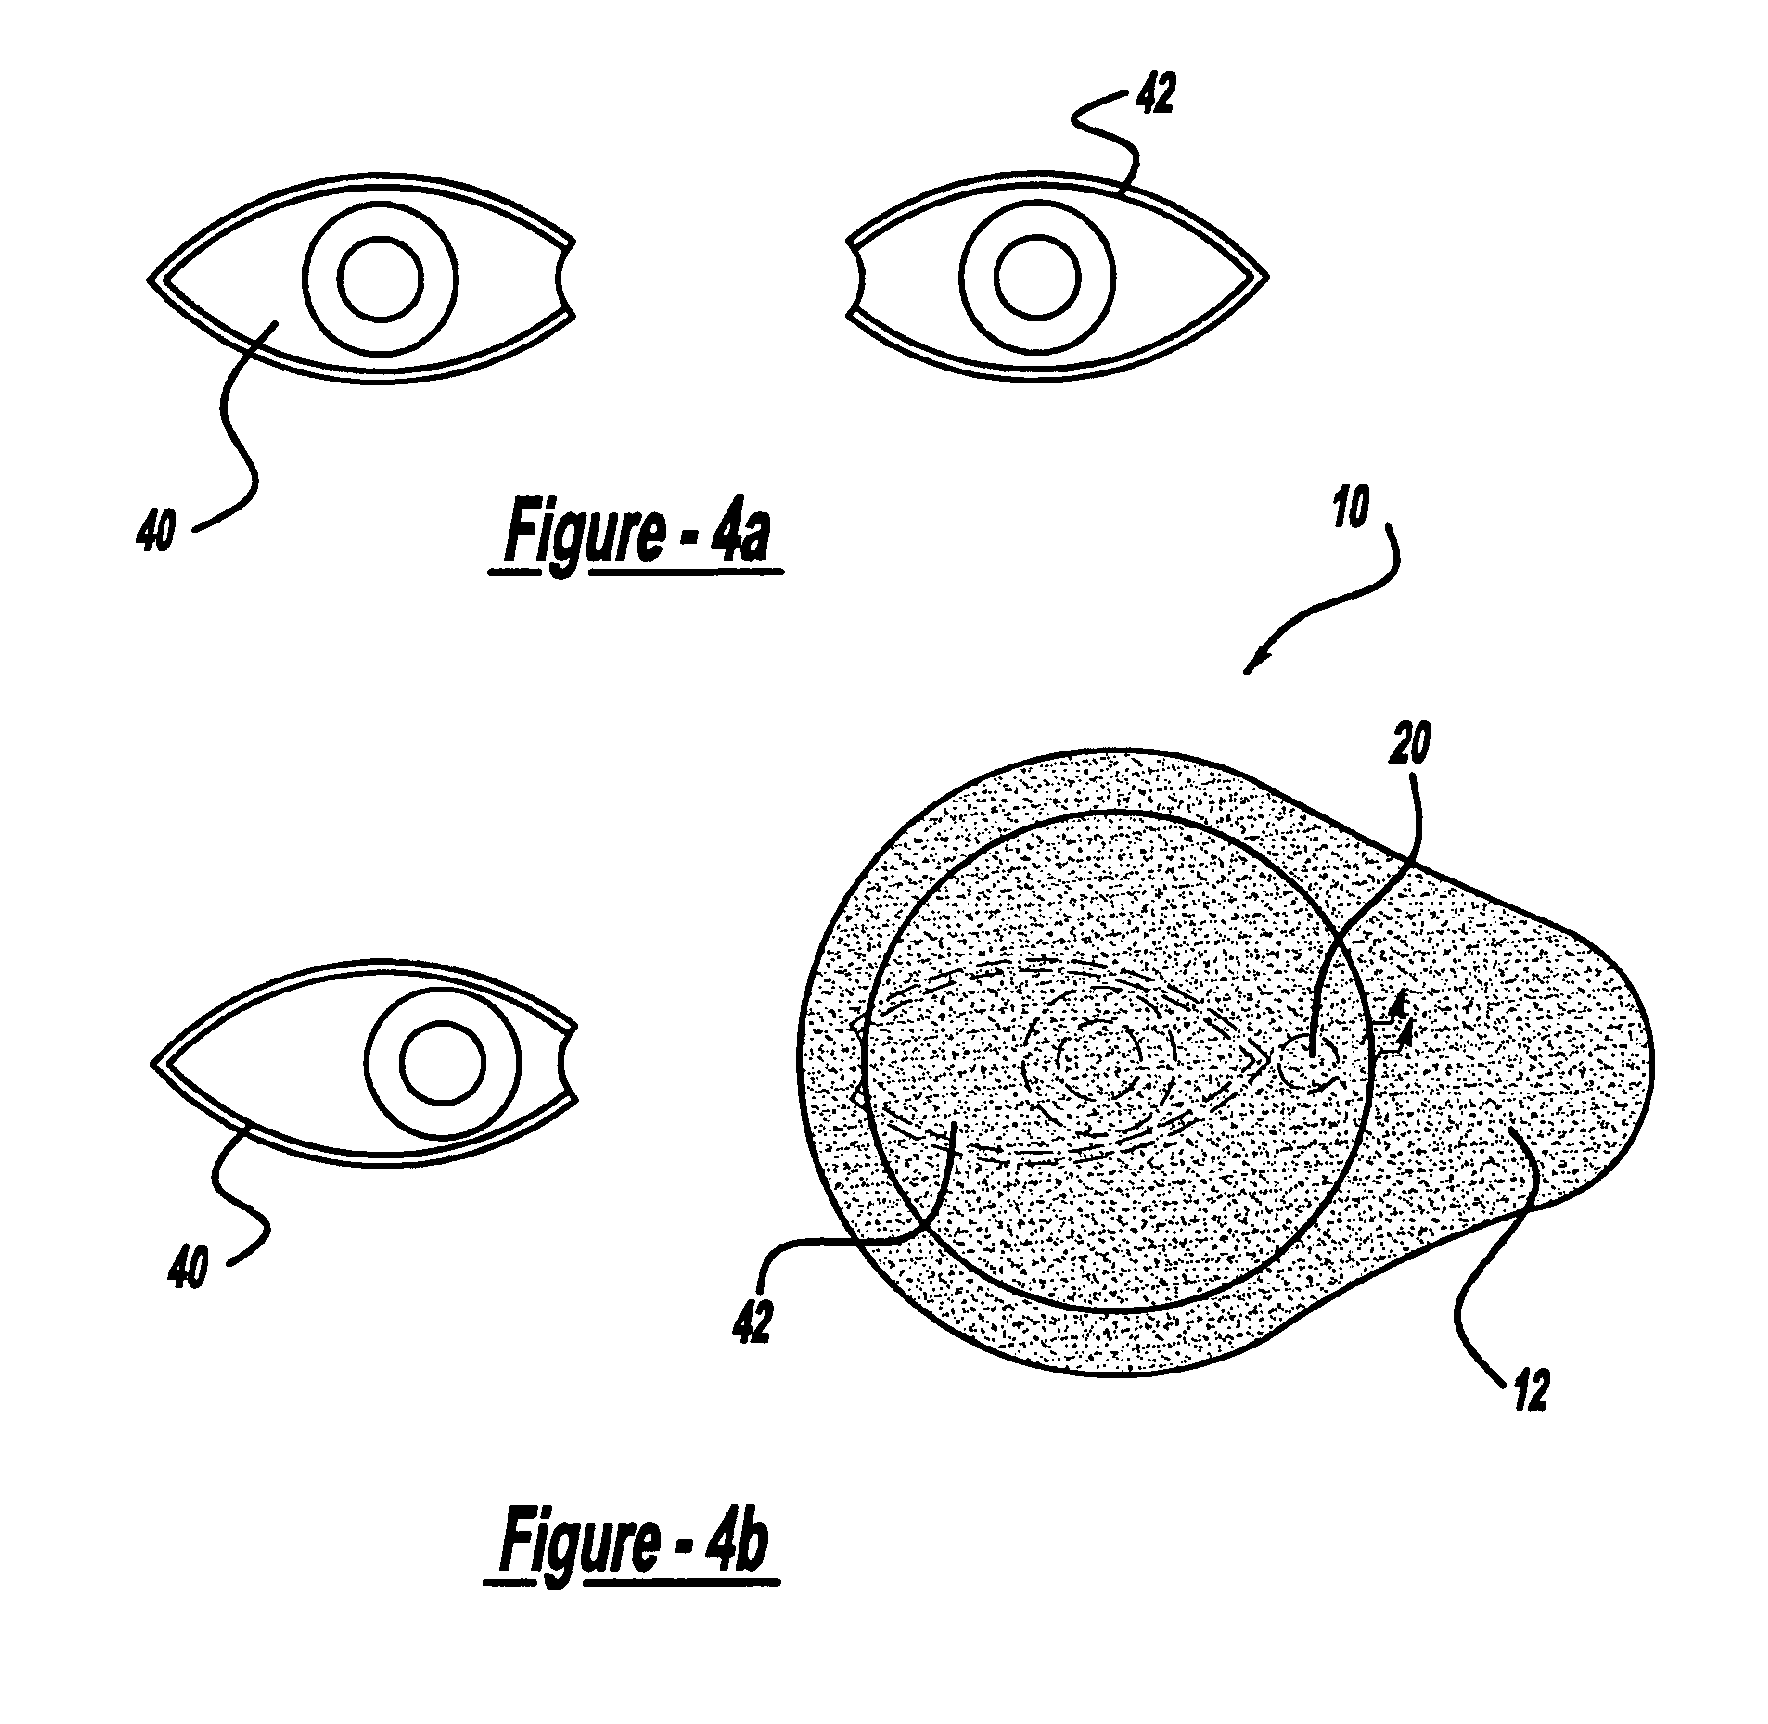 LED fixation device for topical anesthesia eye surgery